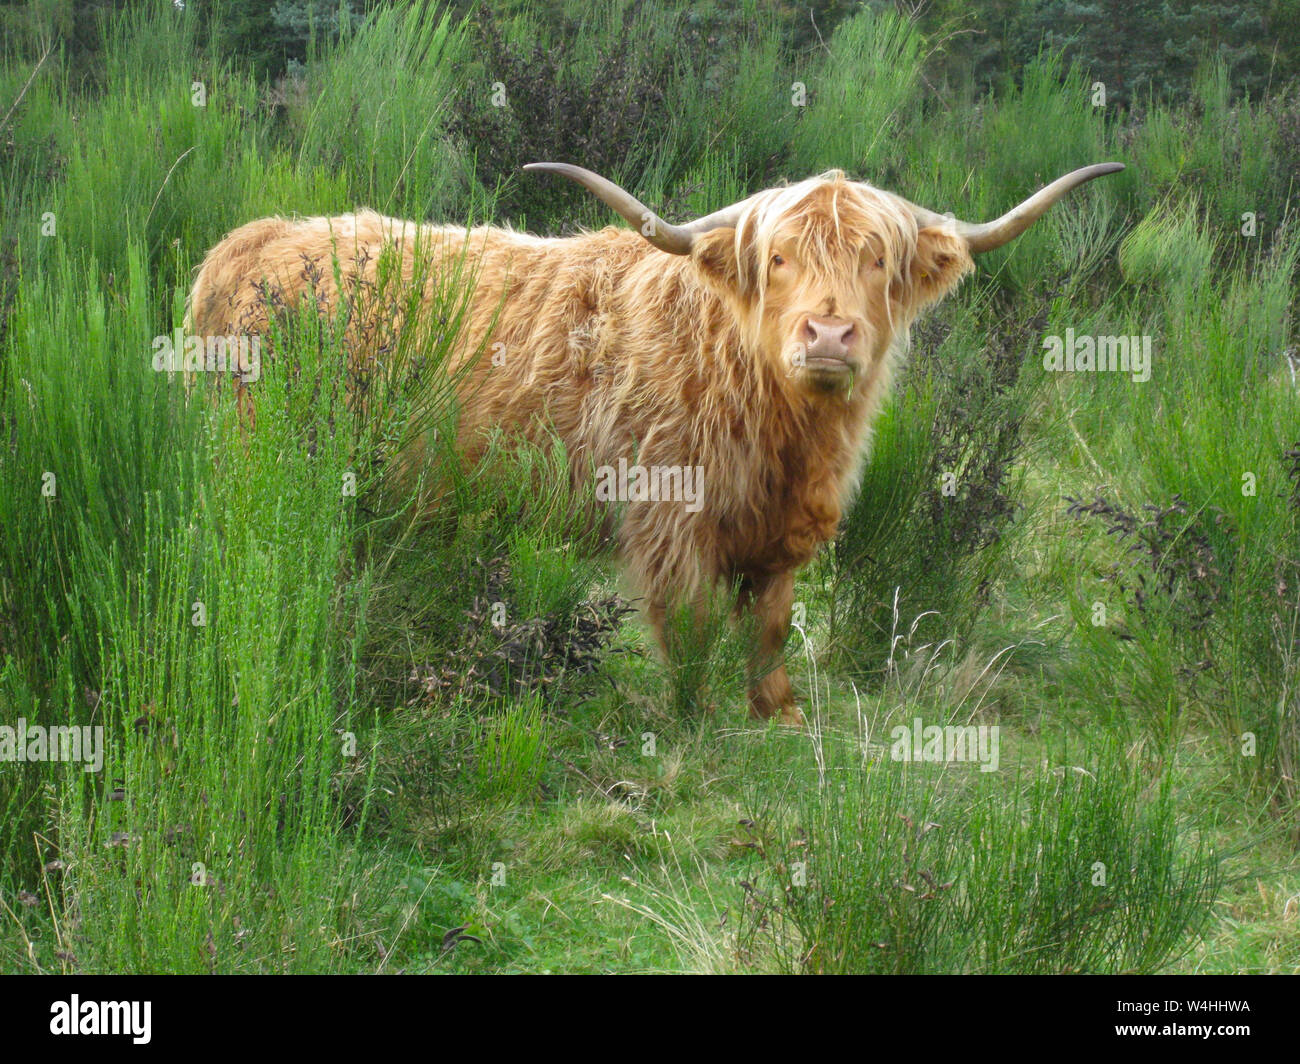 big highland cattle in Scotland on meadow Stock Photo